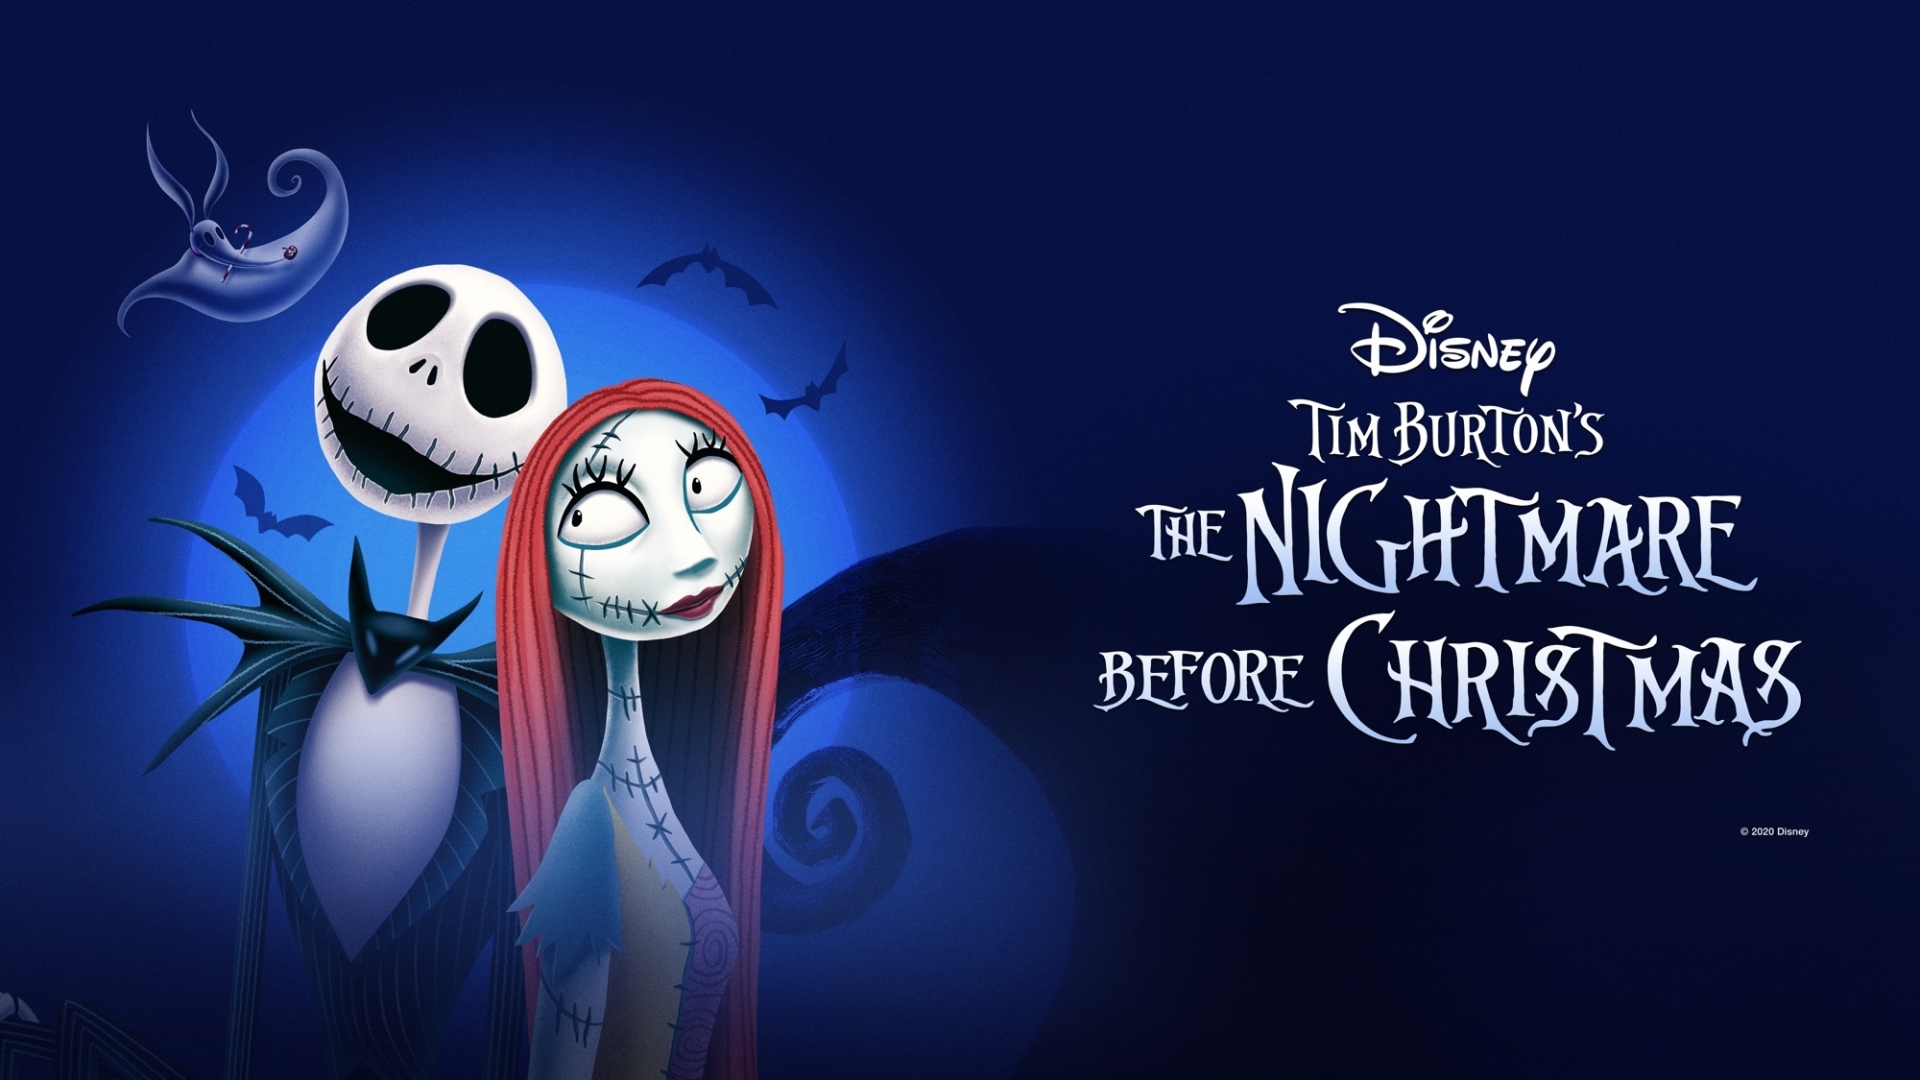 1920x1080 The Nightmare Before Christmas Movie Poster 1080P Laptop Full